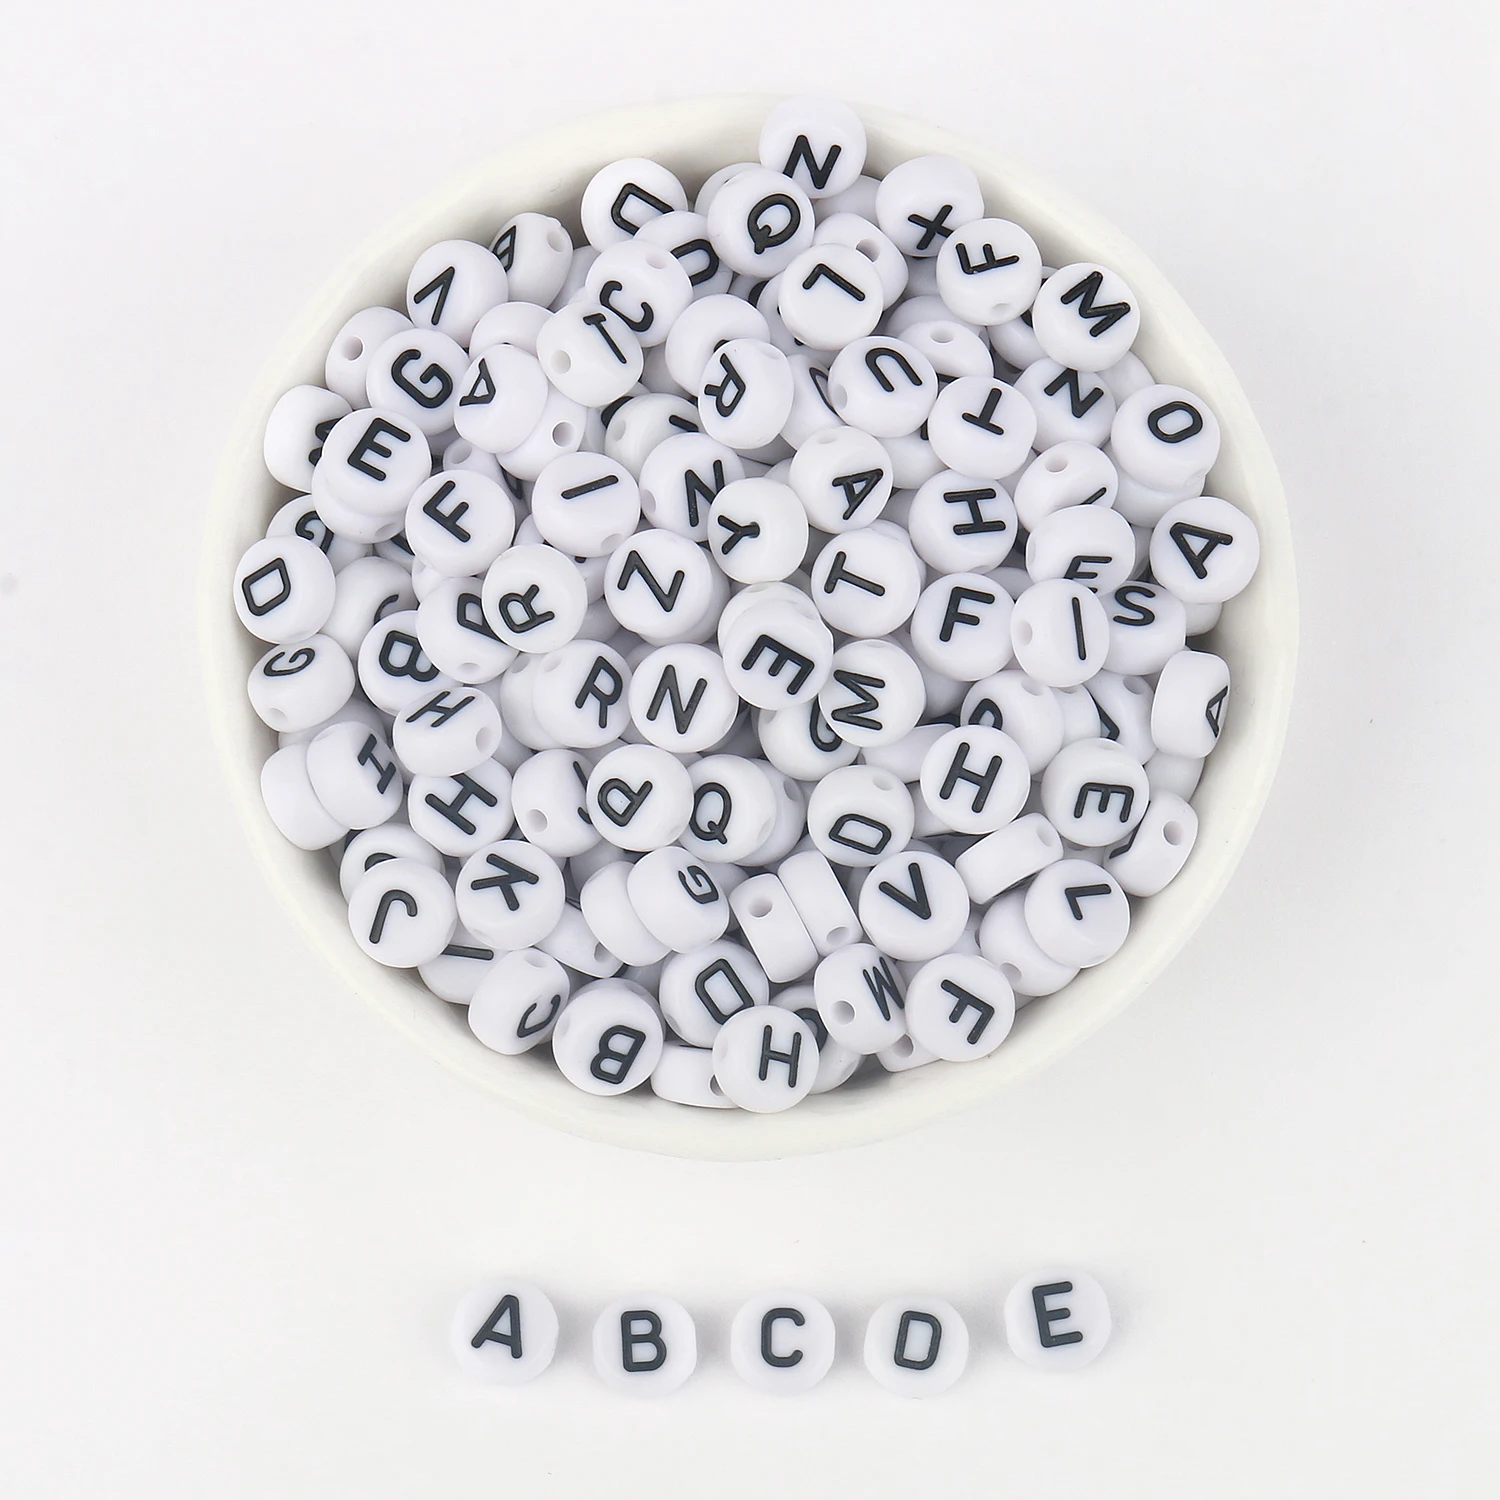 Assorted Letter Beads, 10mm Round, White with Black Letters (500 Pieces)